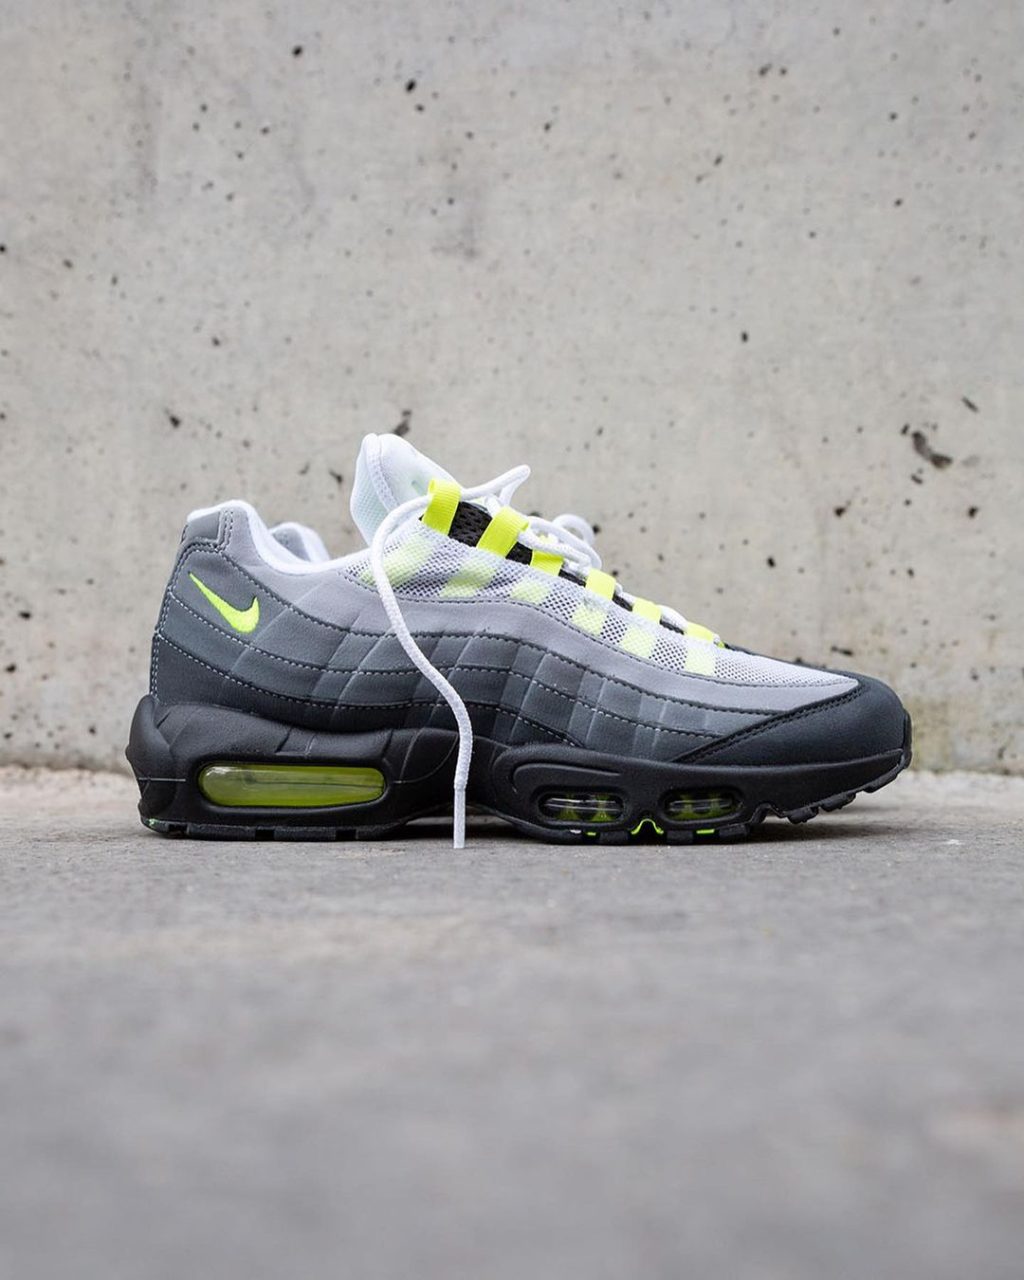 nike-air-max-95-og-neon-2020-ct1689-001-release-20201217